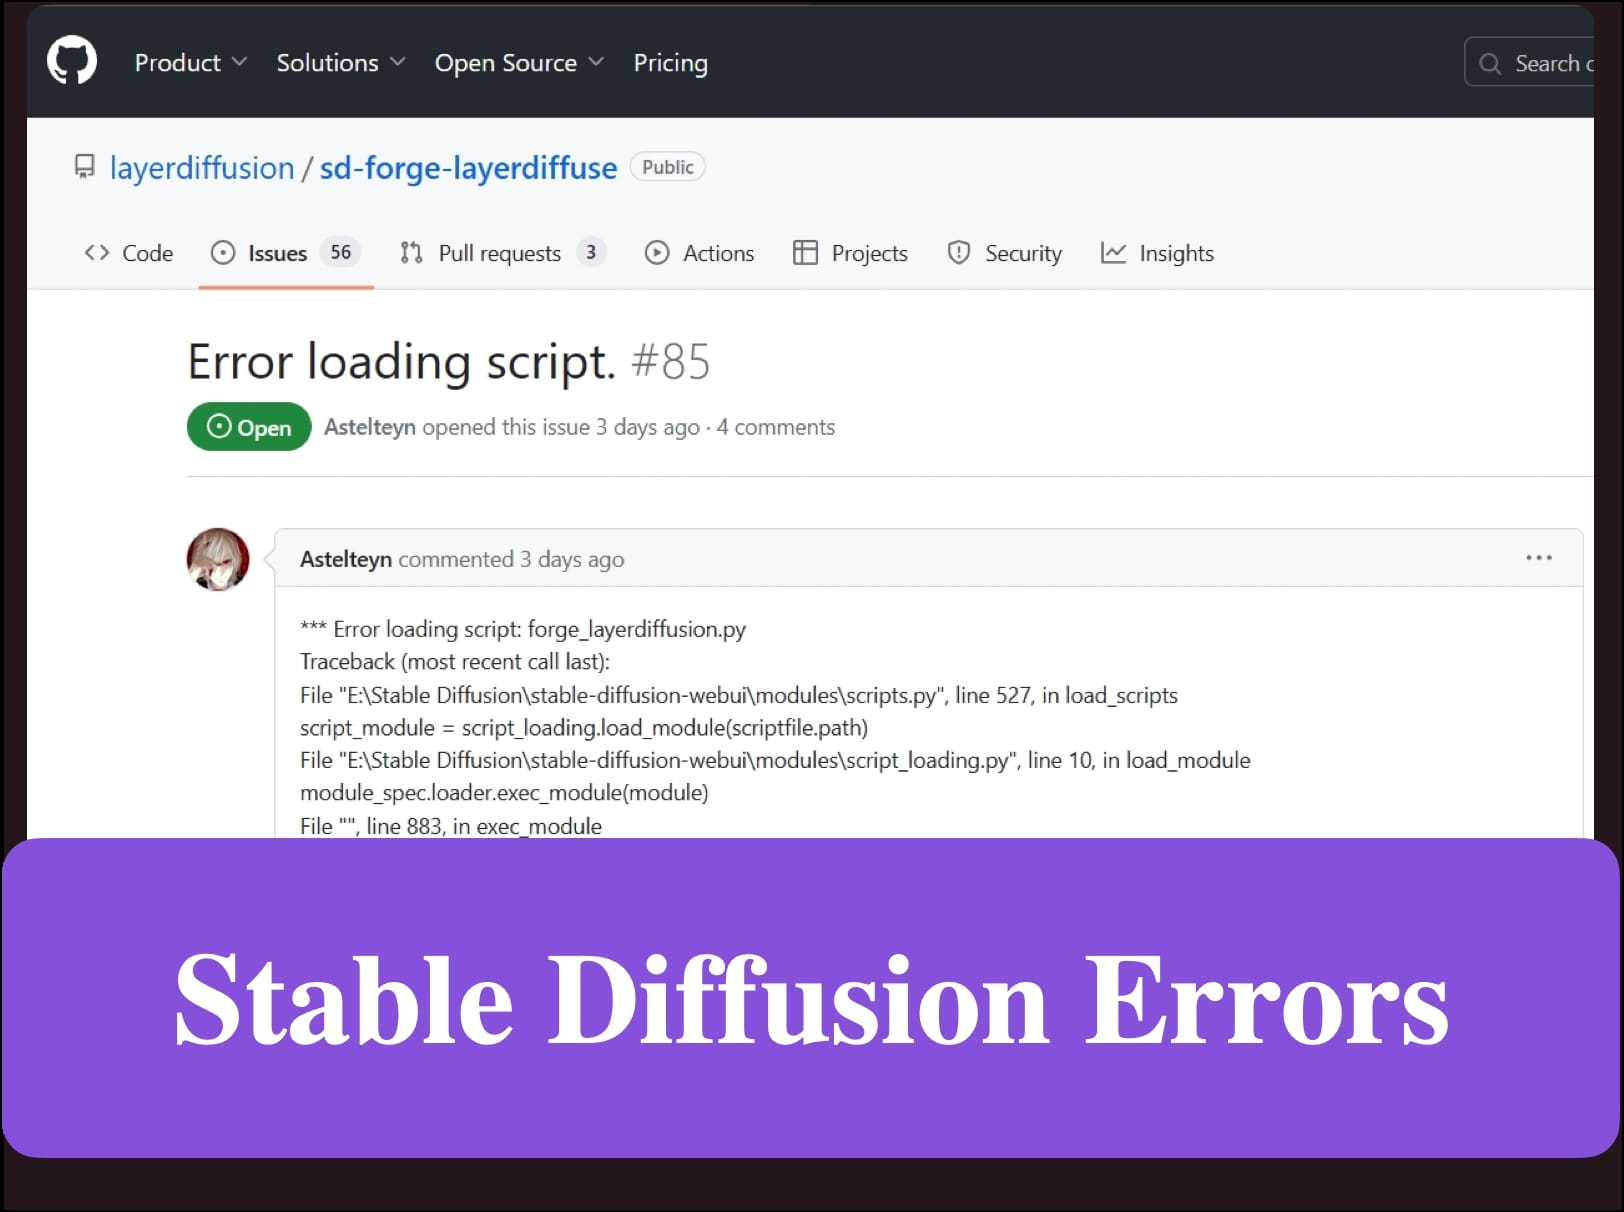 How to Troubleshoot Stable Diffusion Errors